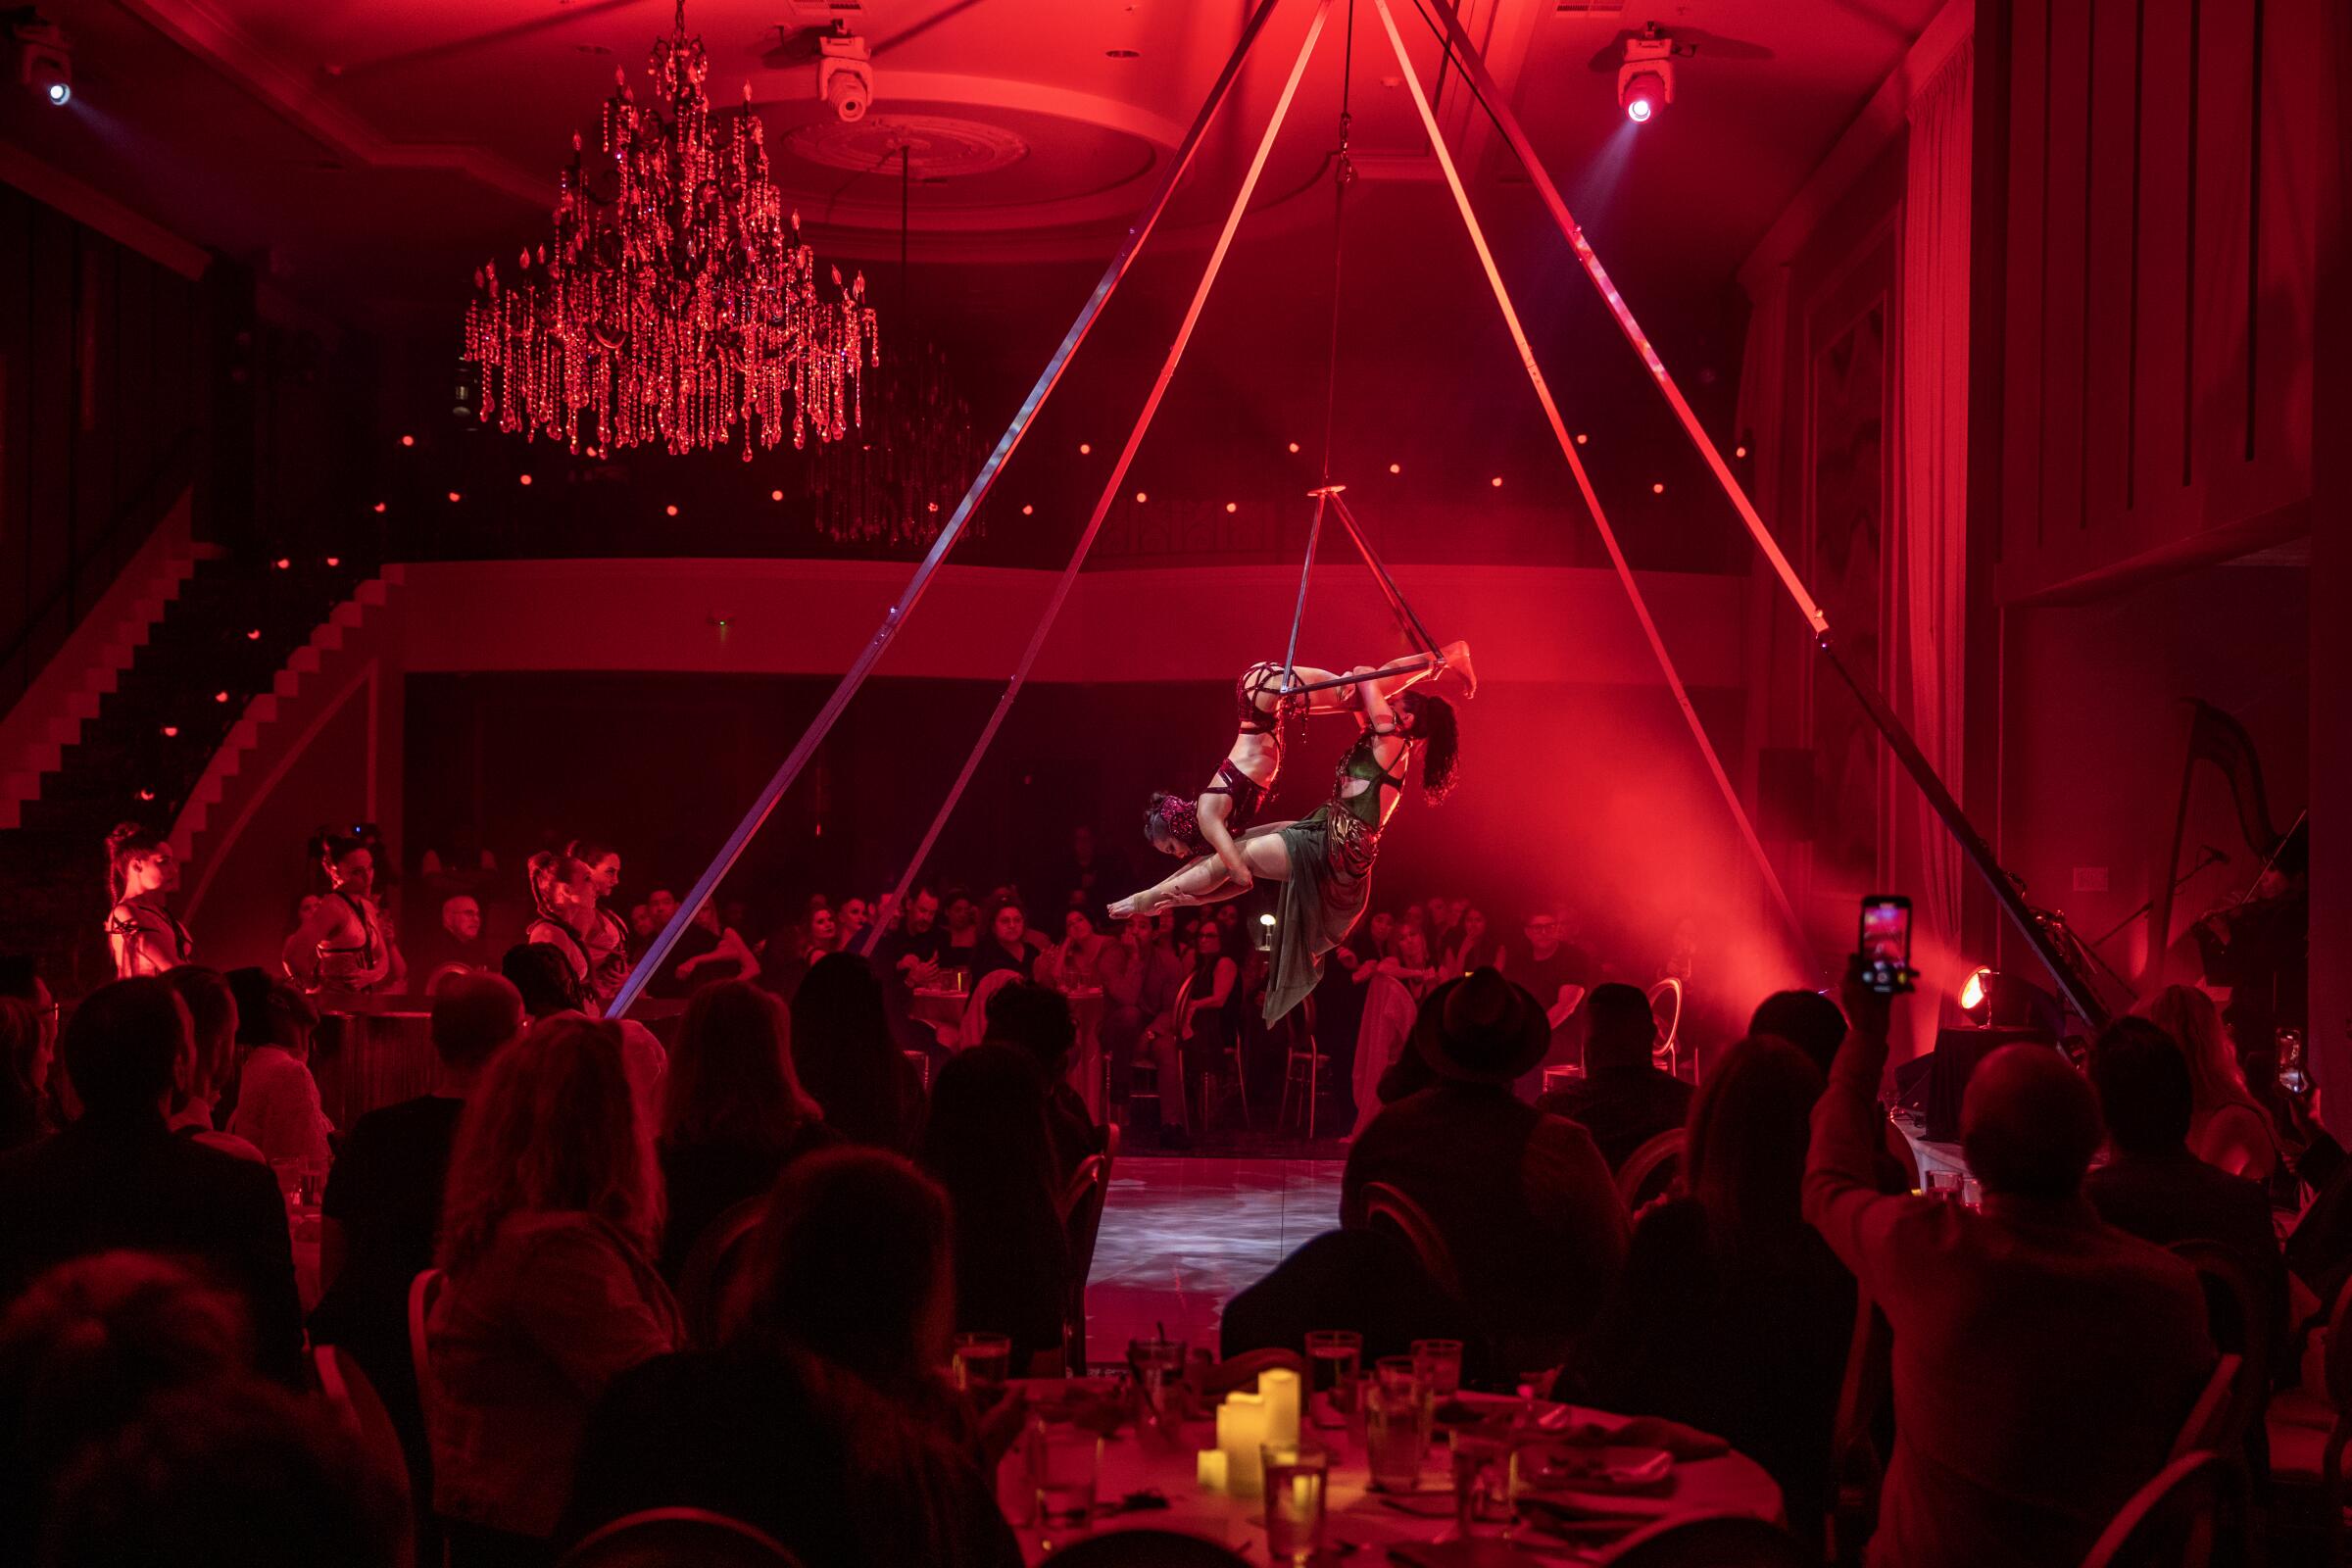 Two women in black perform an aerialist show in a red-lighted theater with an audience.